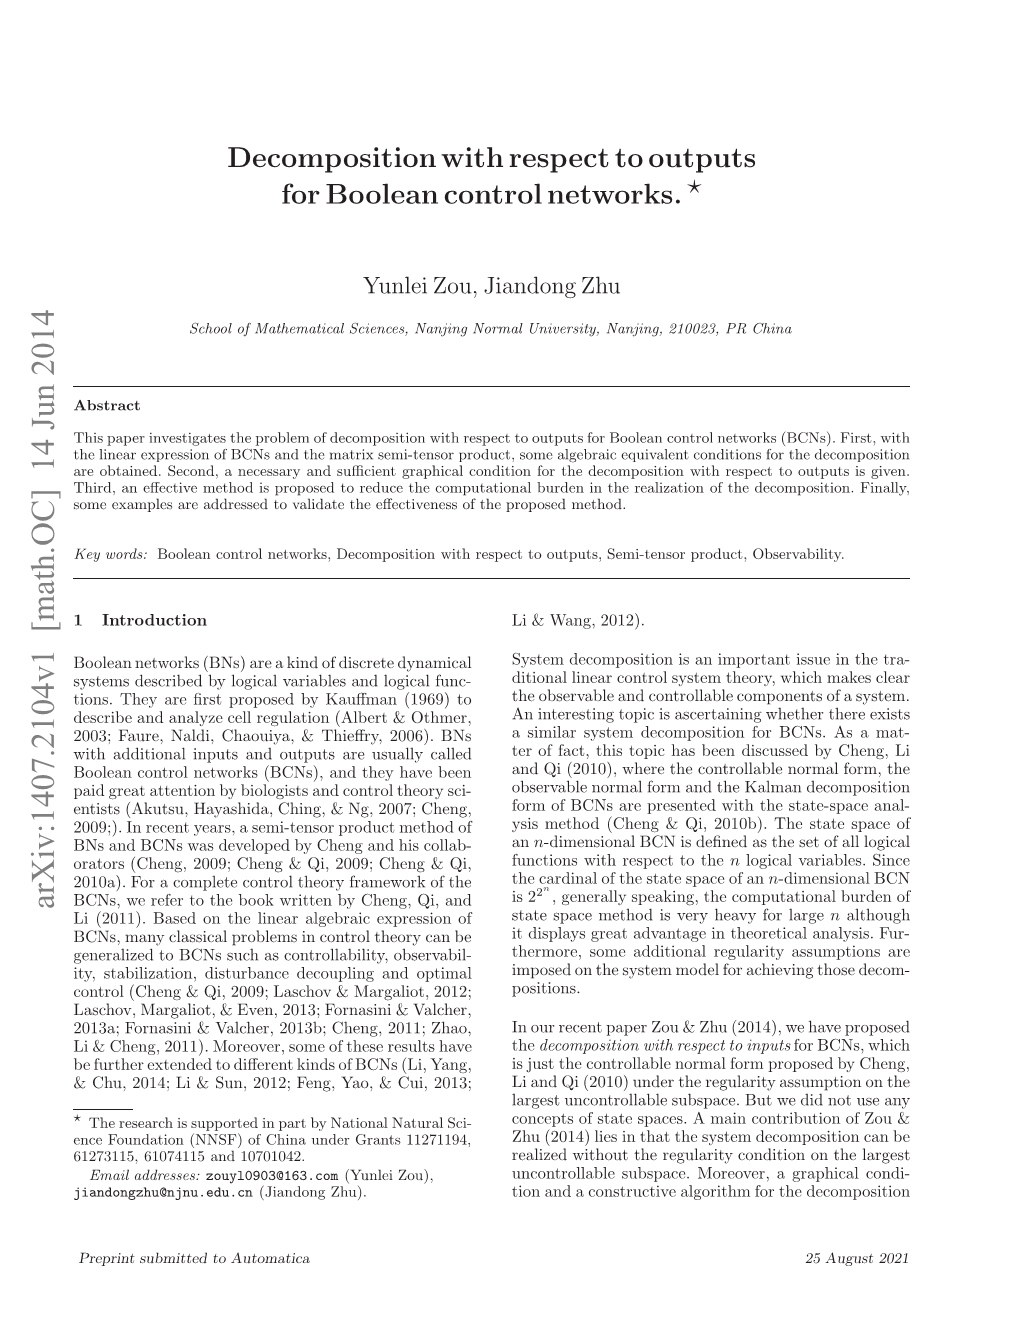 Decomposition with Respect to Outputs for Boolean Control Networks